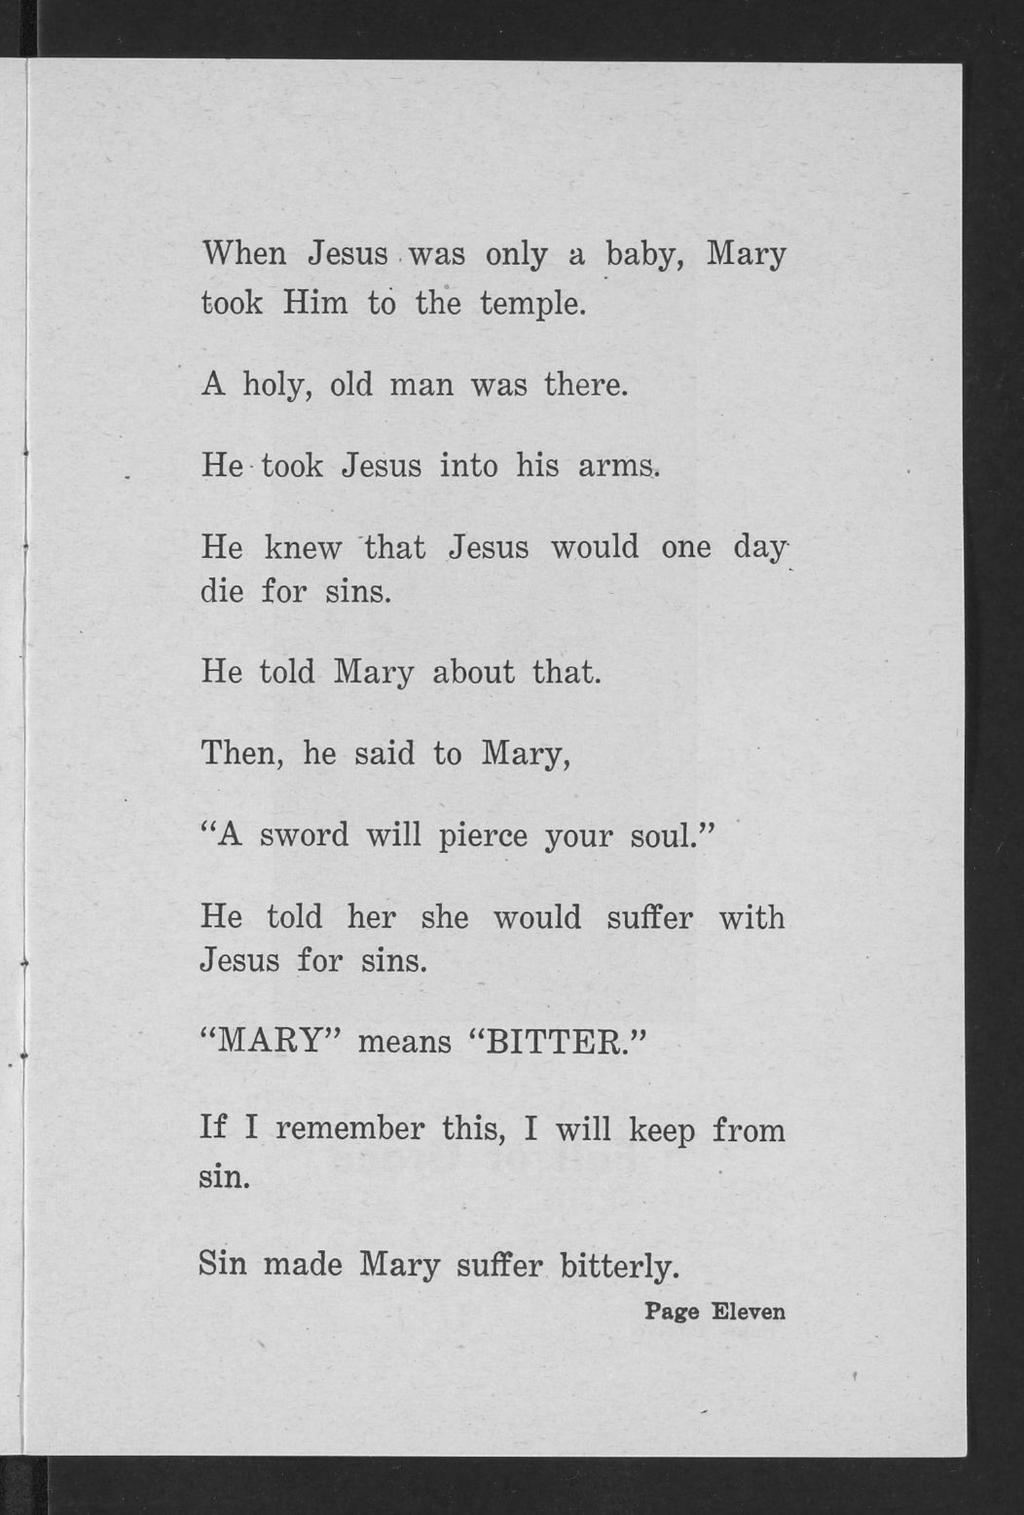 When Jesus was only a baby, Mary took Him to the temple. A holy, old man was there. He took Jesus into his arms. He knew "that Jesus would one day die for sins. He told Mary about that.